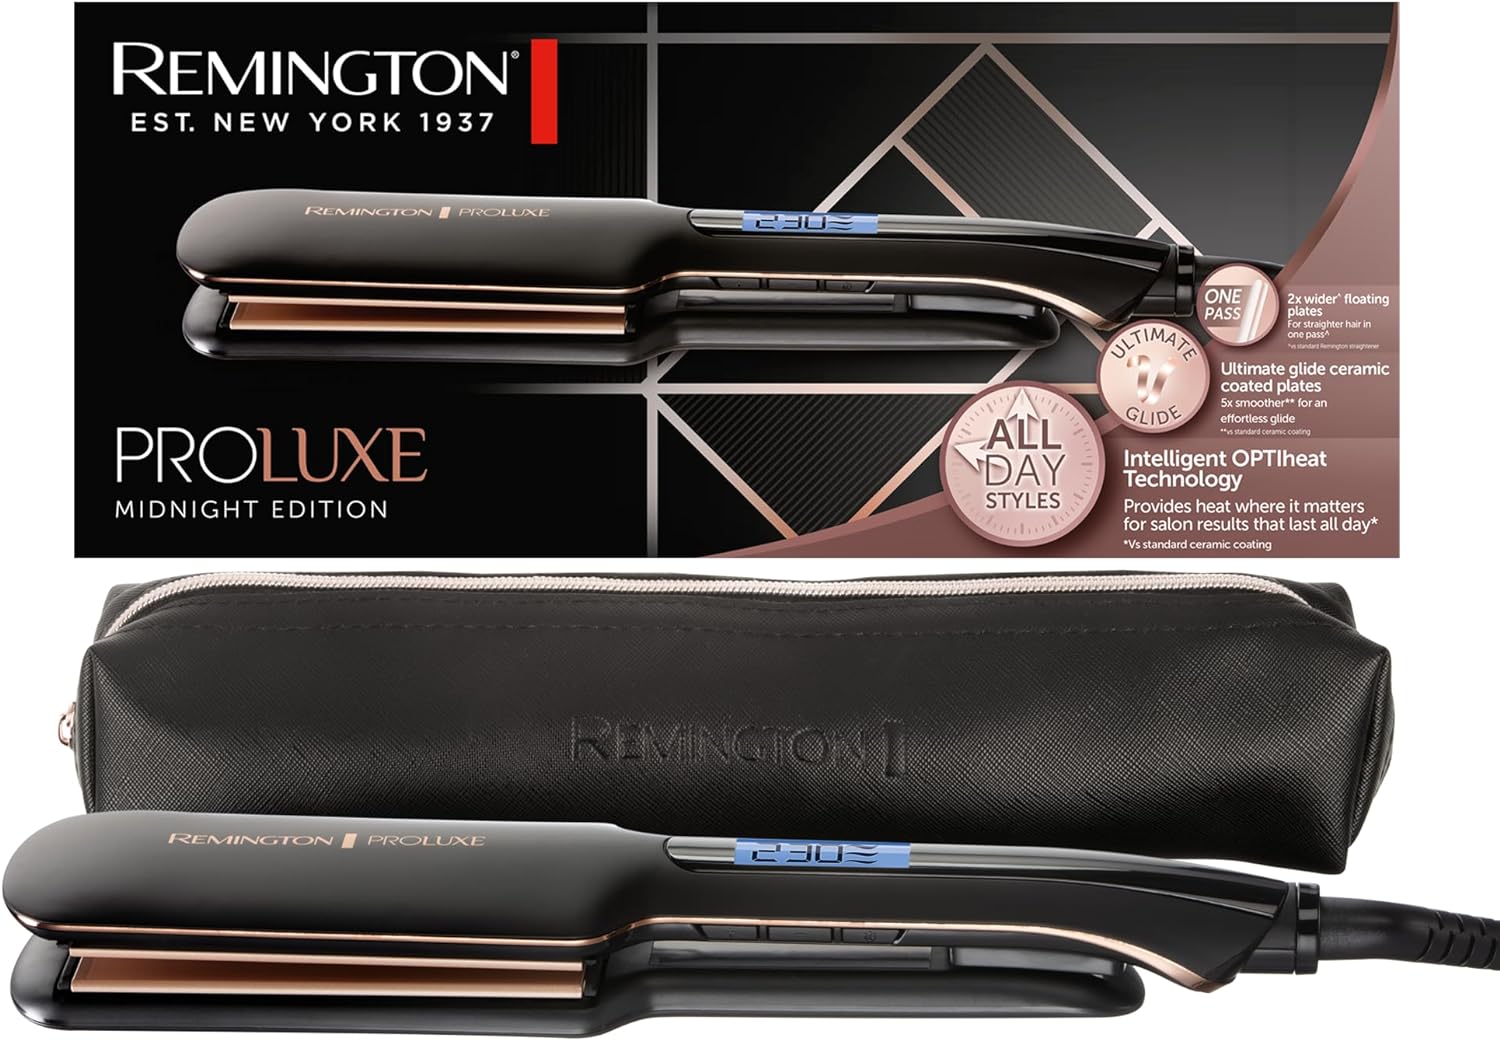 Remington Proluxe Straightener [Extra Wide Ceramic Styling Plates, 110 x 50 mm] (OPTIheat Technology, Pro+ Setting for Gentle Styling, Digital Display, Quick Heating) Hair Straightener S9150B